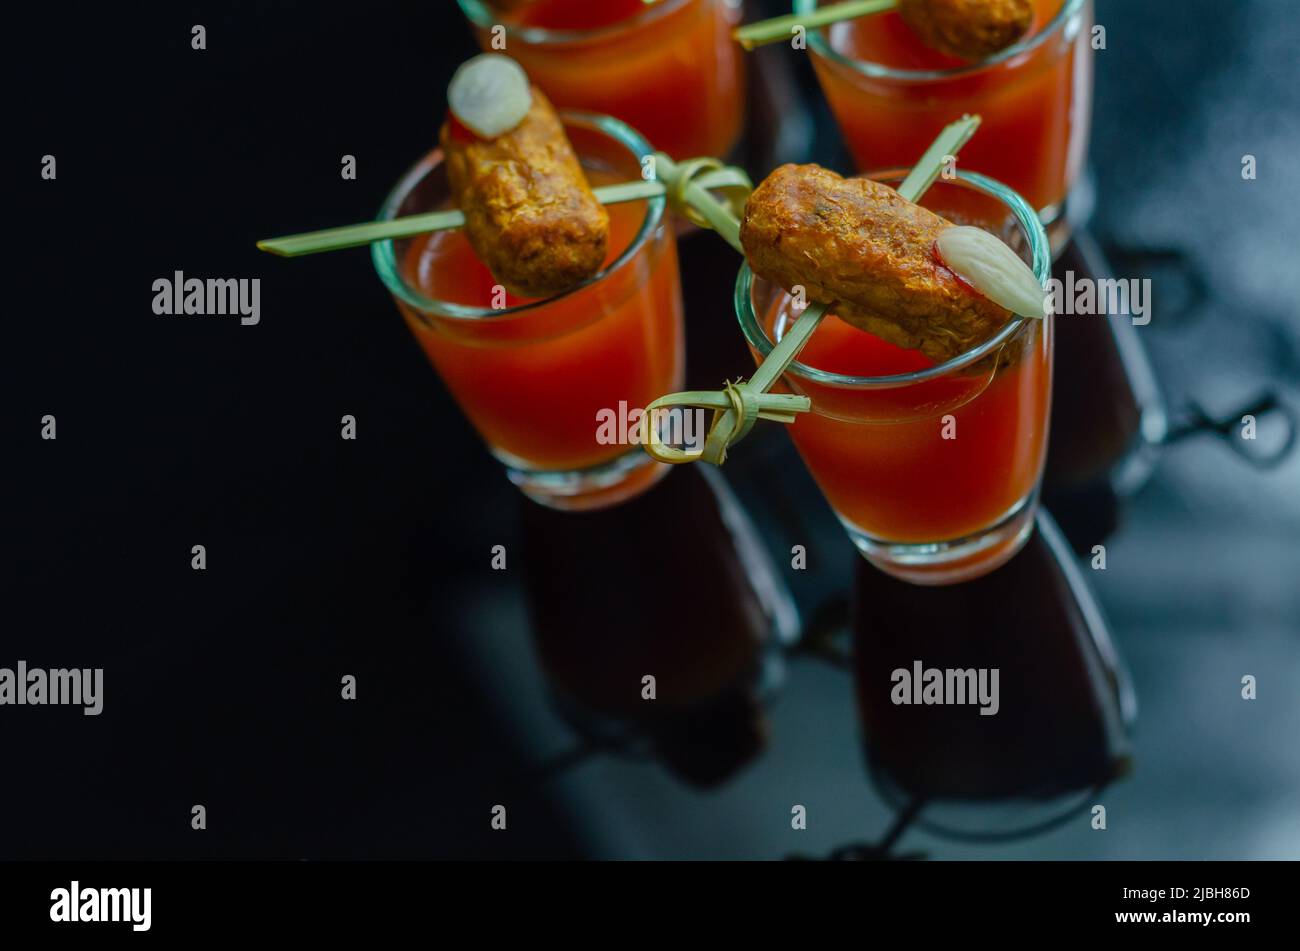 https://c8.alamy.com/comp/2JBH86D/bloody-mary-cocktails-in-the-shots-drink-served-with-halloween-bloody-fingers-pork-cocktail-sausages-decorated-with-flaked-almonds-funny-food-2JBH86D.jpg